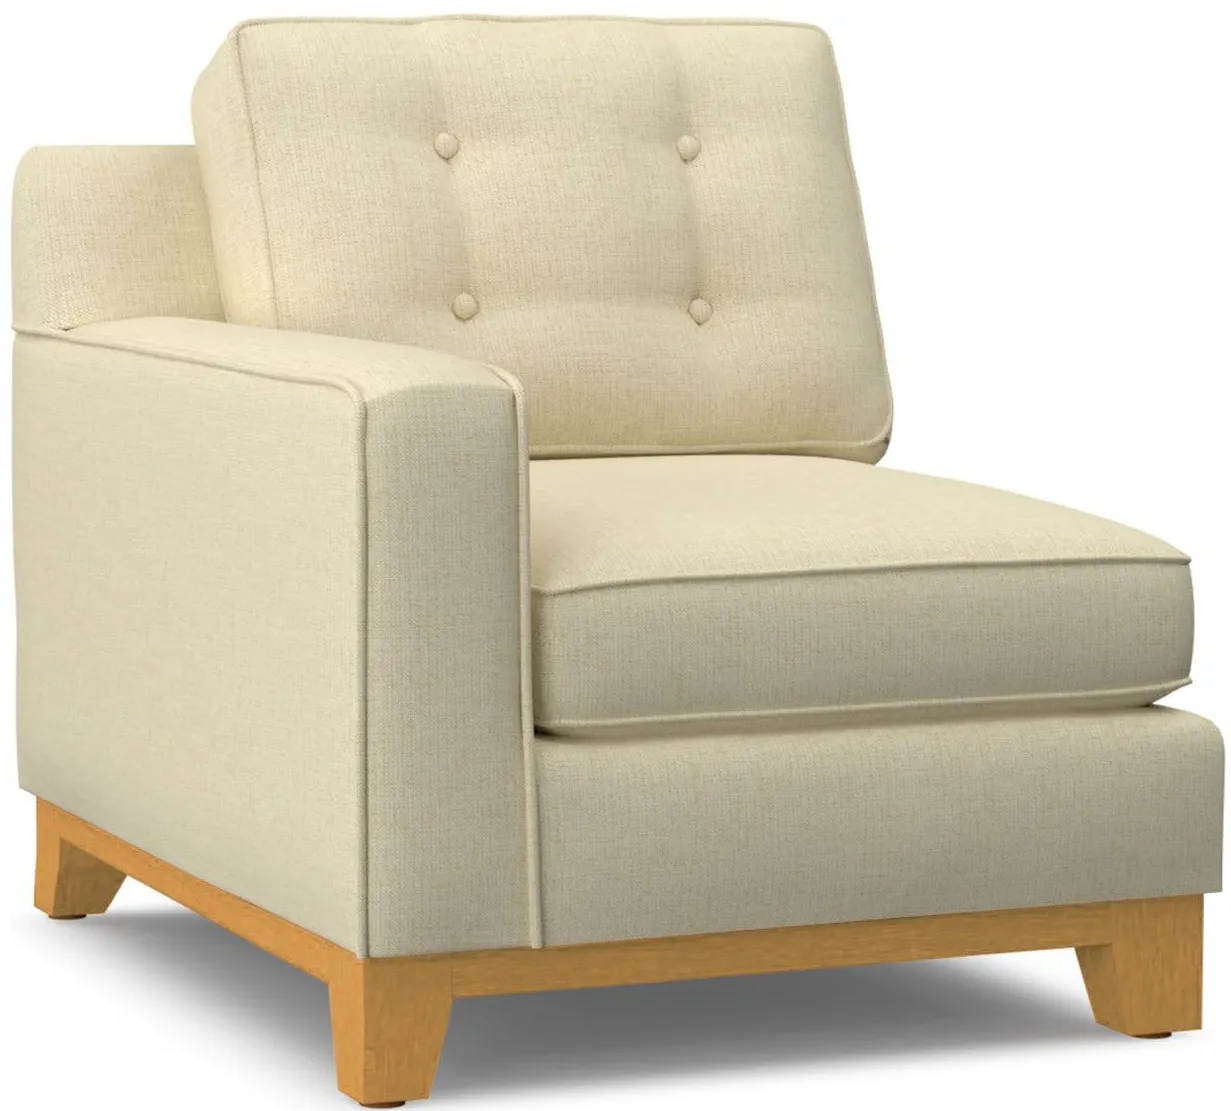 Brentwood Left Arm Chair